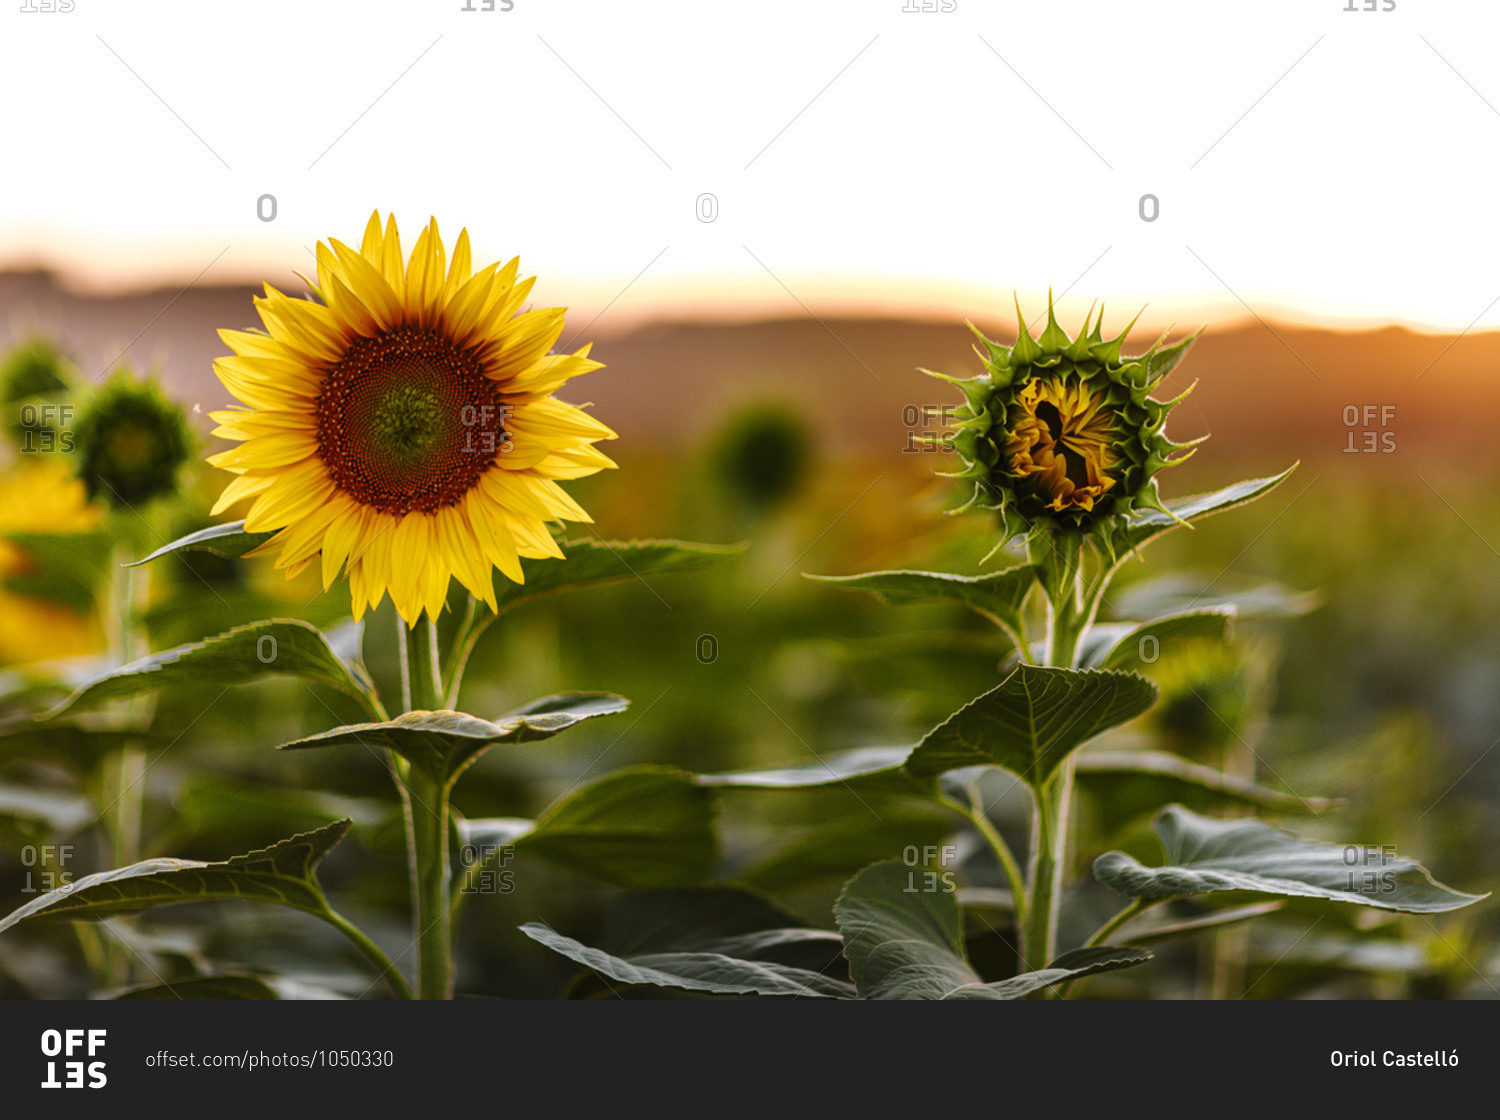 A vibrant sunflower in a field beside one preparing to bloom